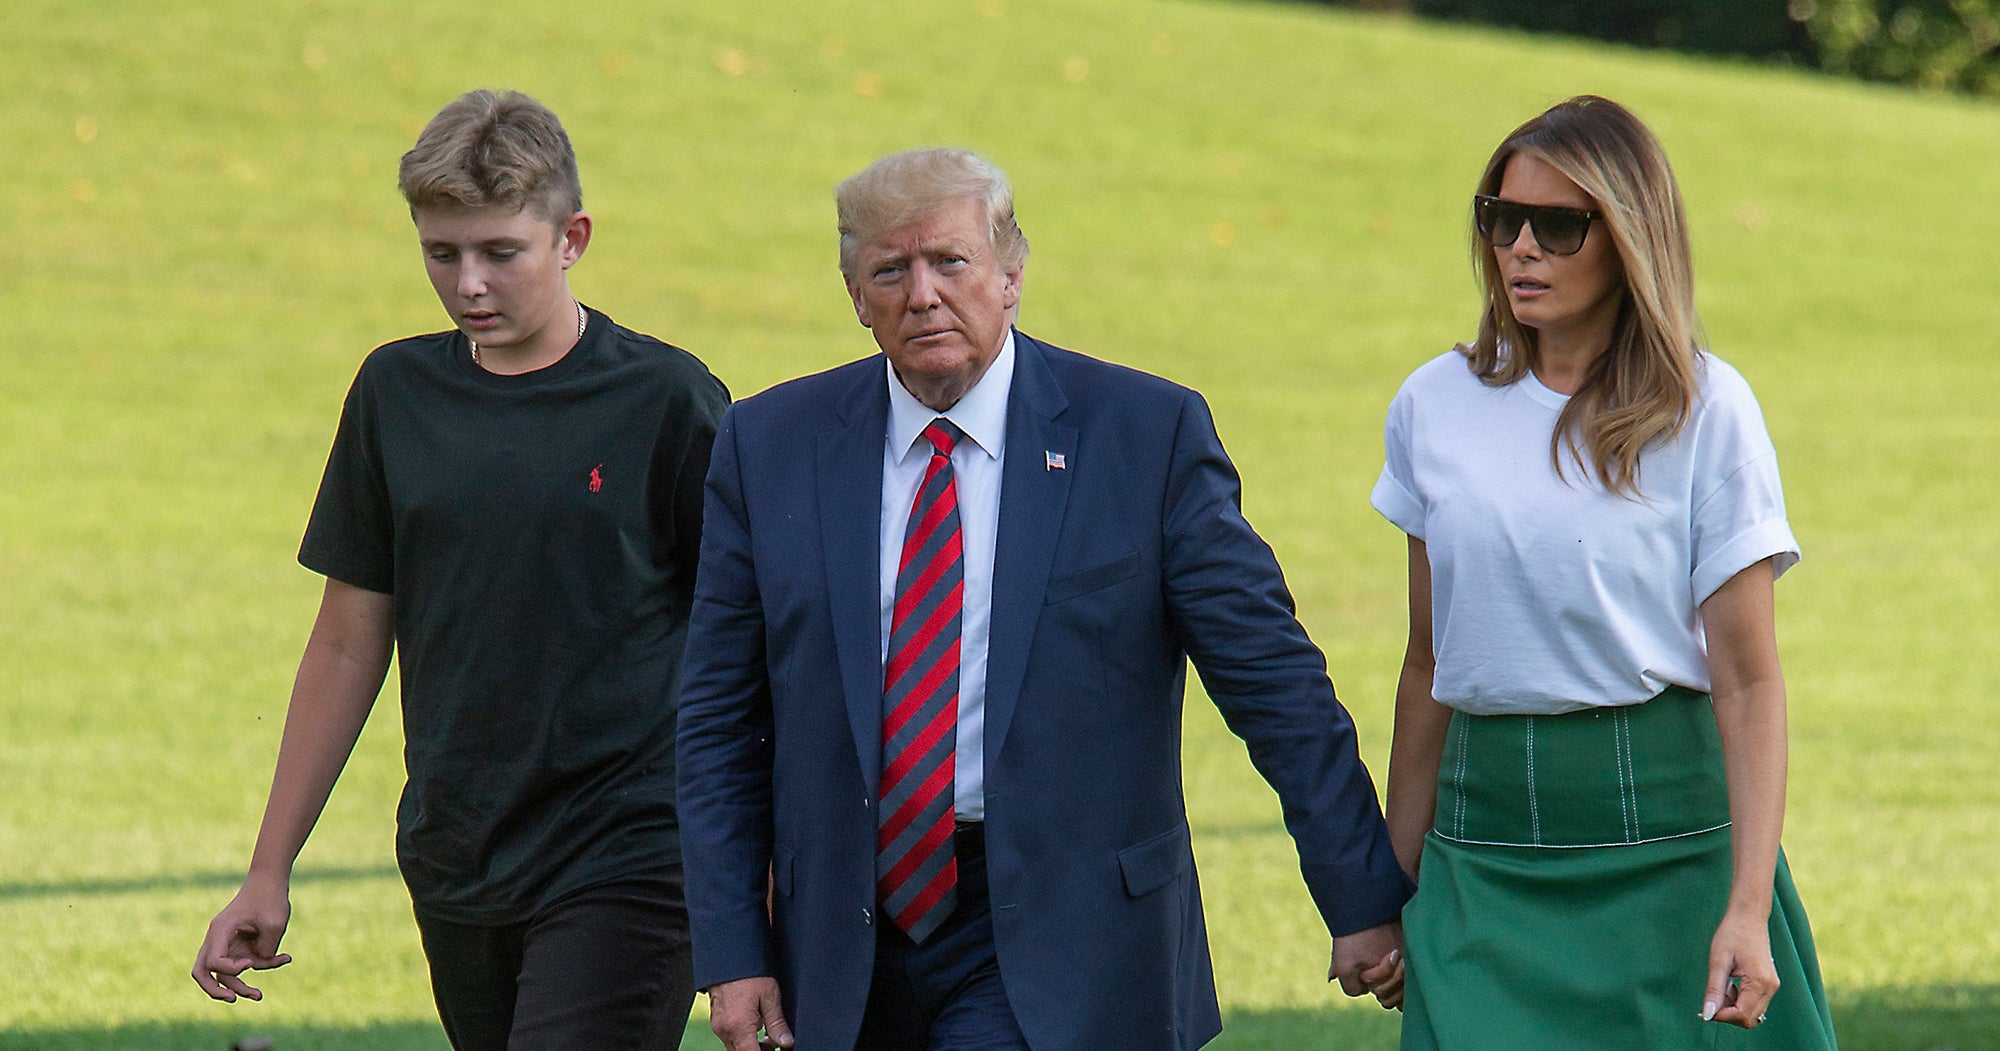 How Tall Is Barron Trump His Height Keeps Changing